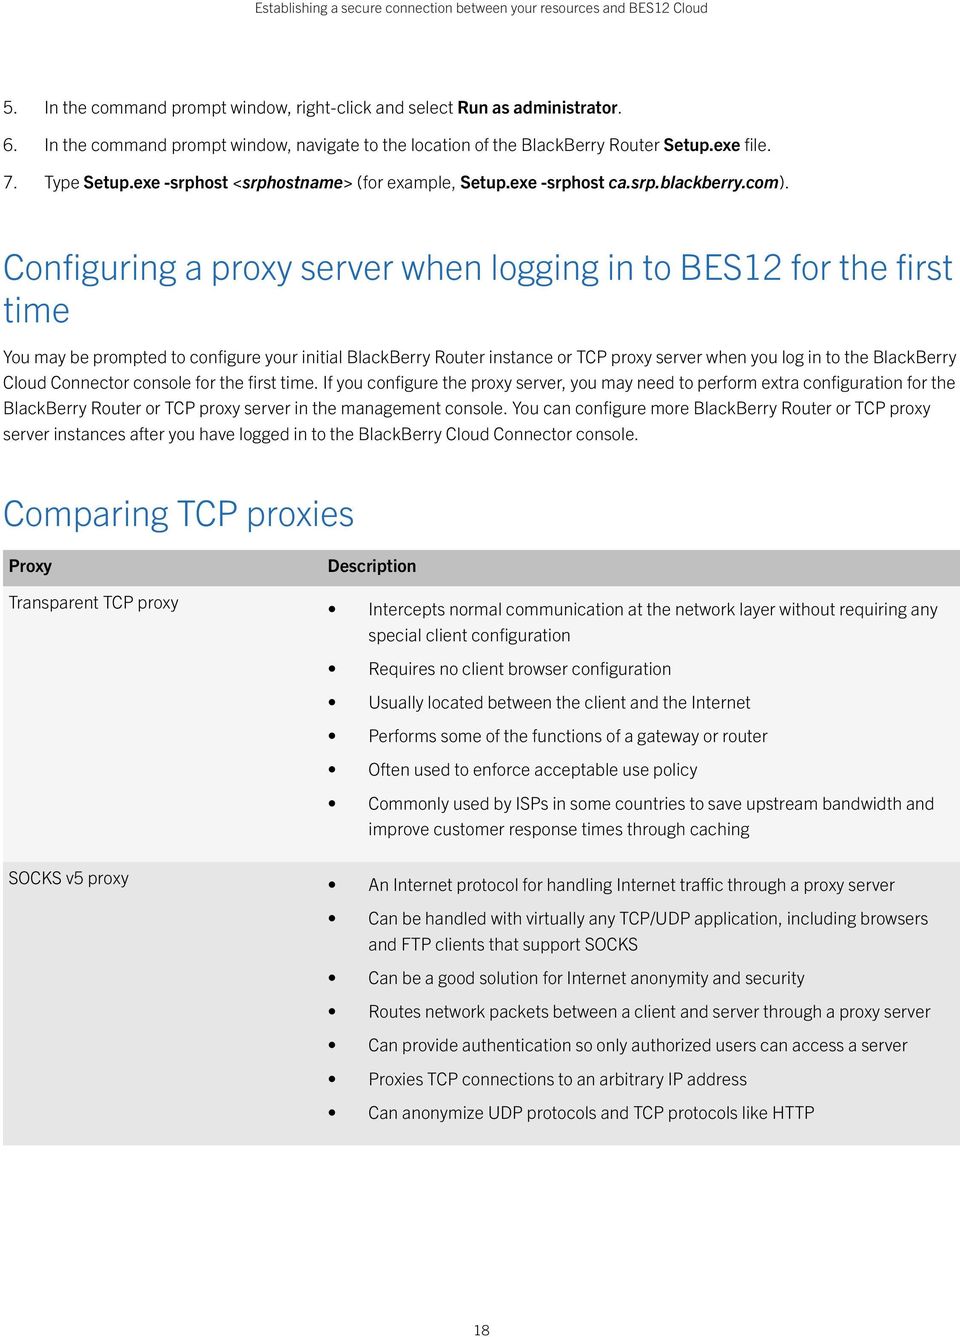 Configuring a proxy server when logging in to BES12 for the first time You may be prompted to configure your initial BlackBerry Router instance or TCP proxy server when you log in to the BlackBerry